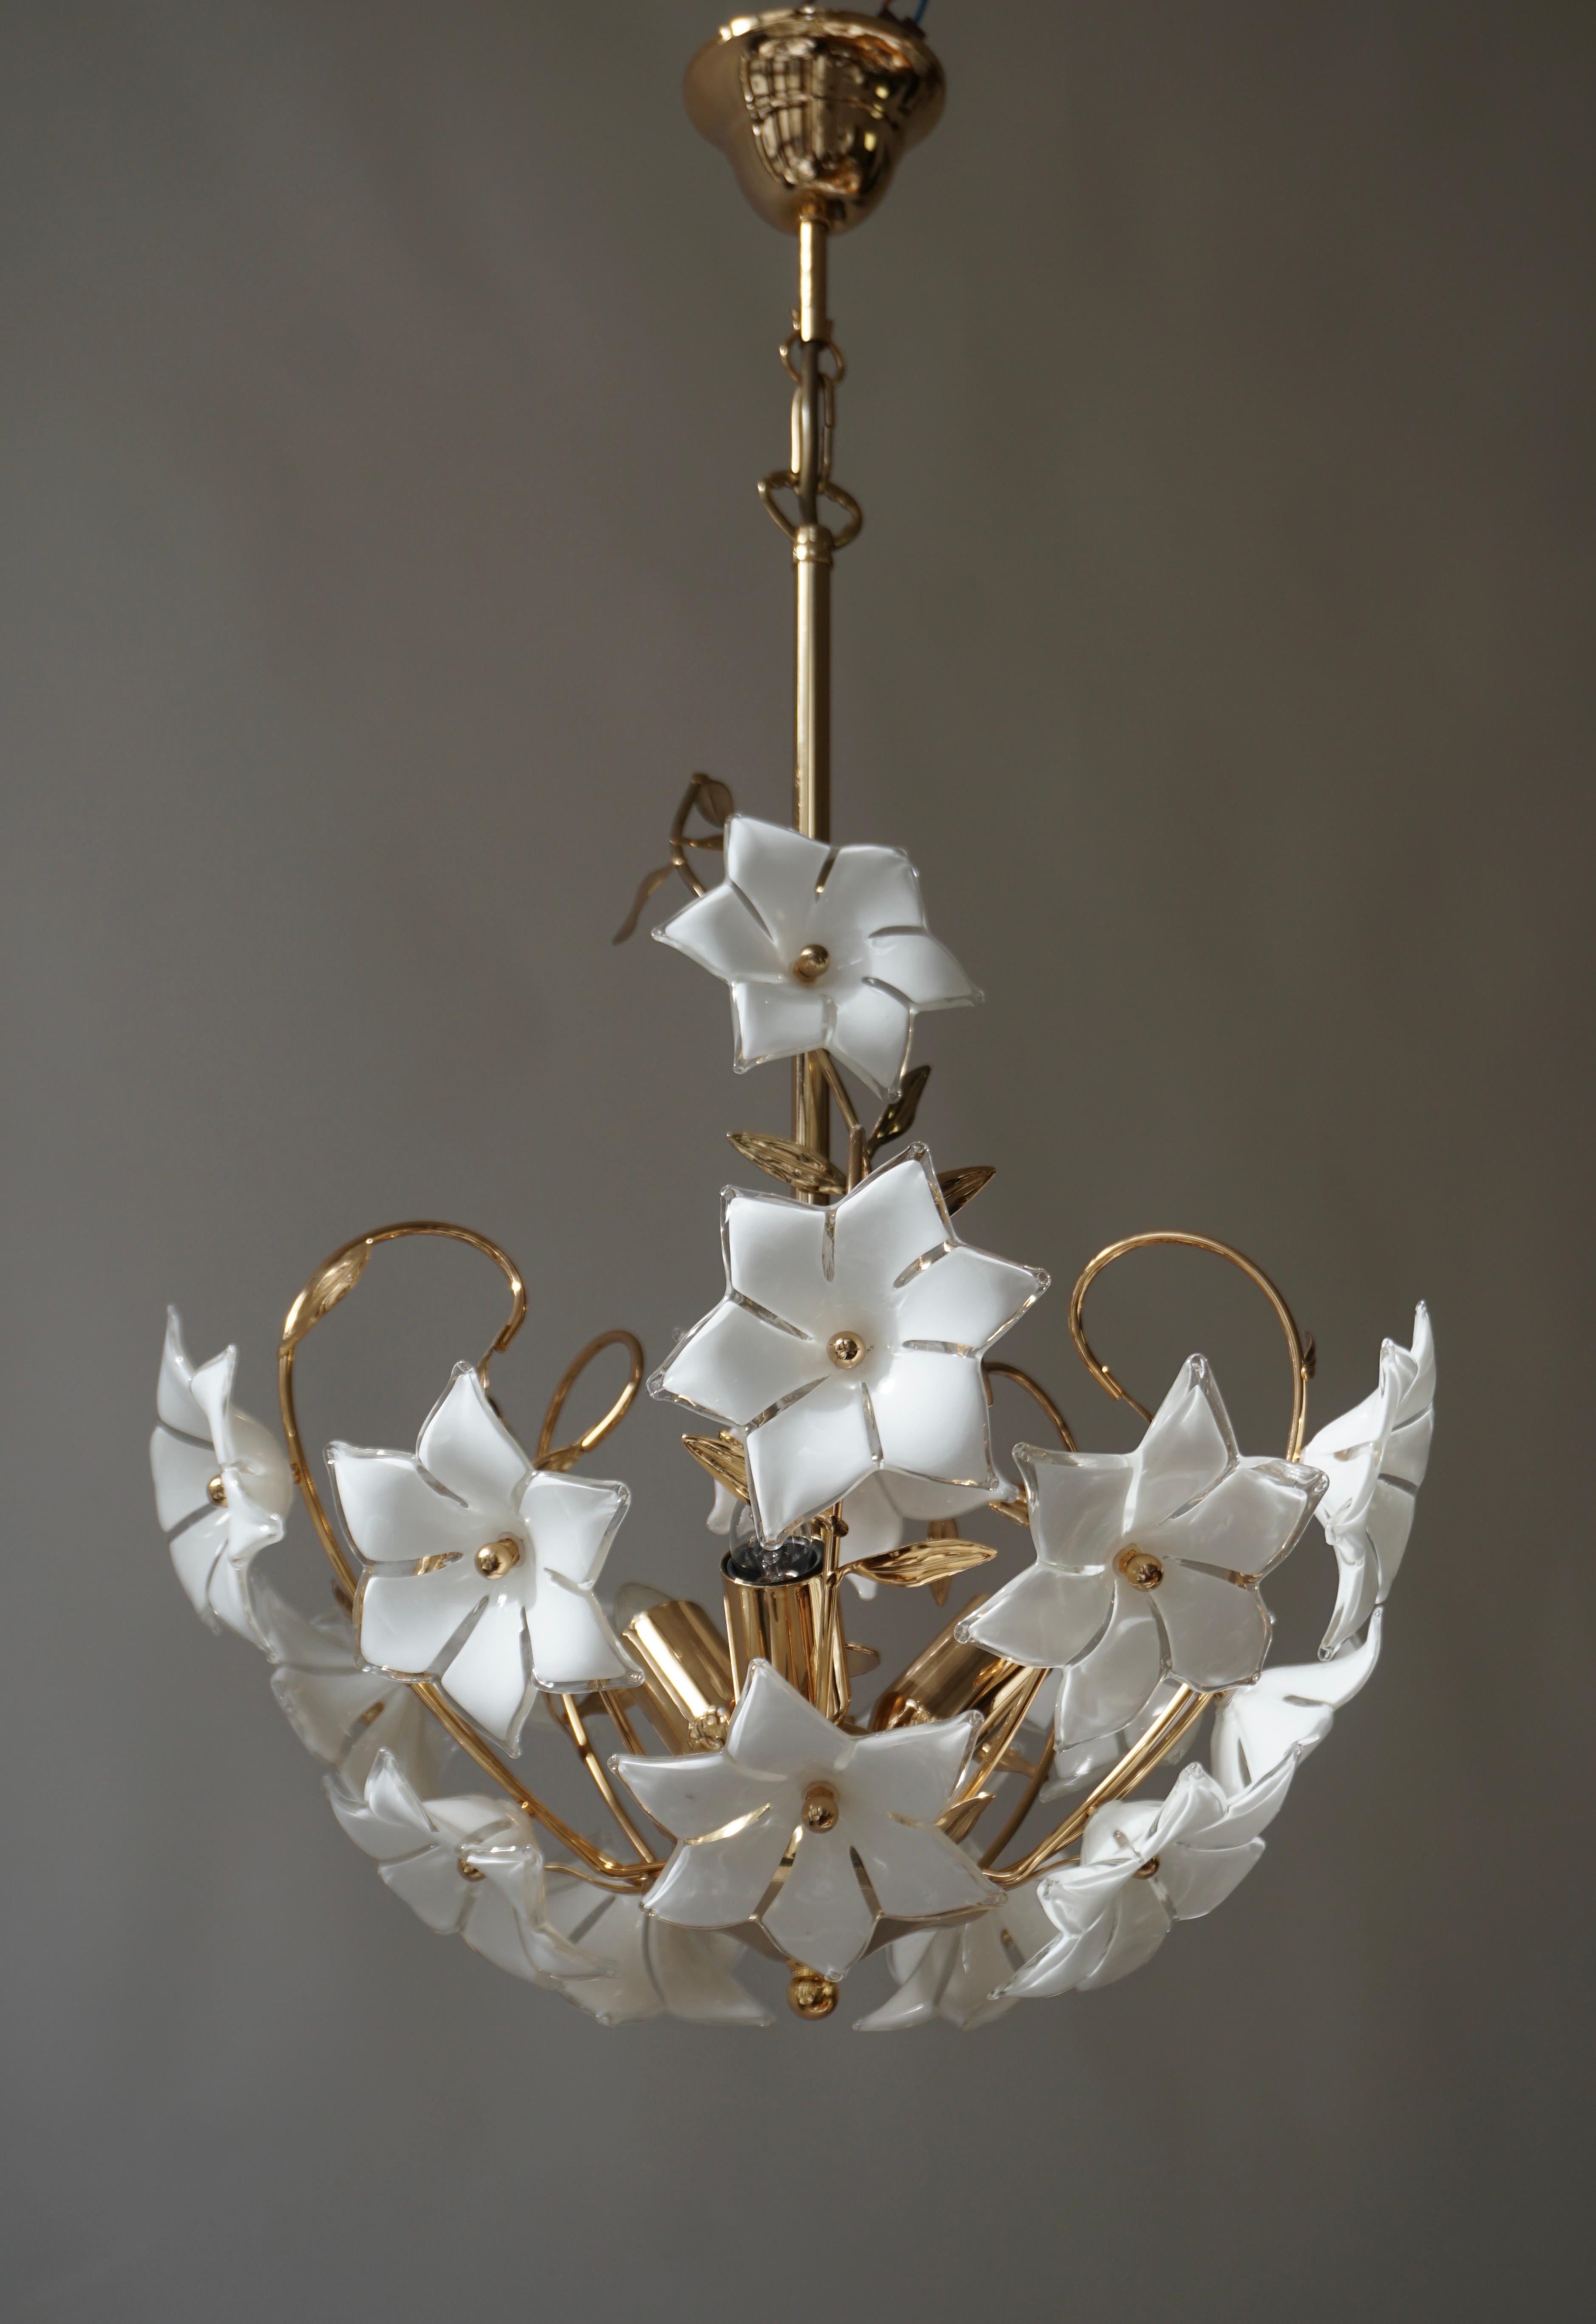 Italian Murano glass white flower chandelier. 

This stunning piece has such a light, delicate white color and brings such a warmth to any space.
The current height from the ceiling is 26